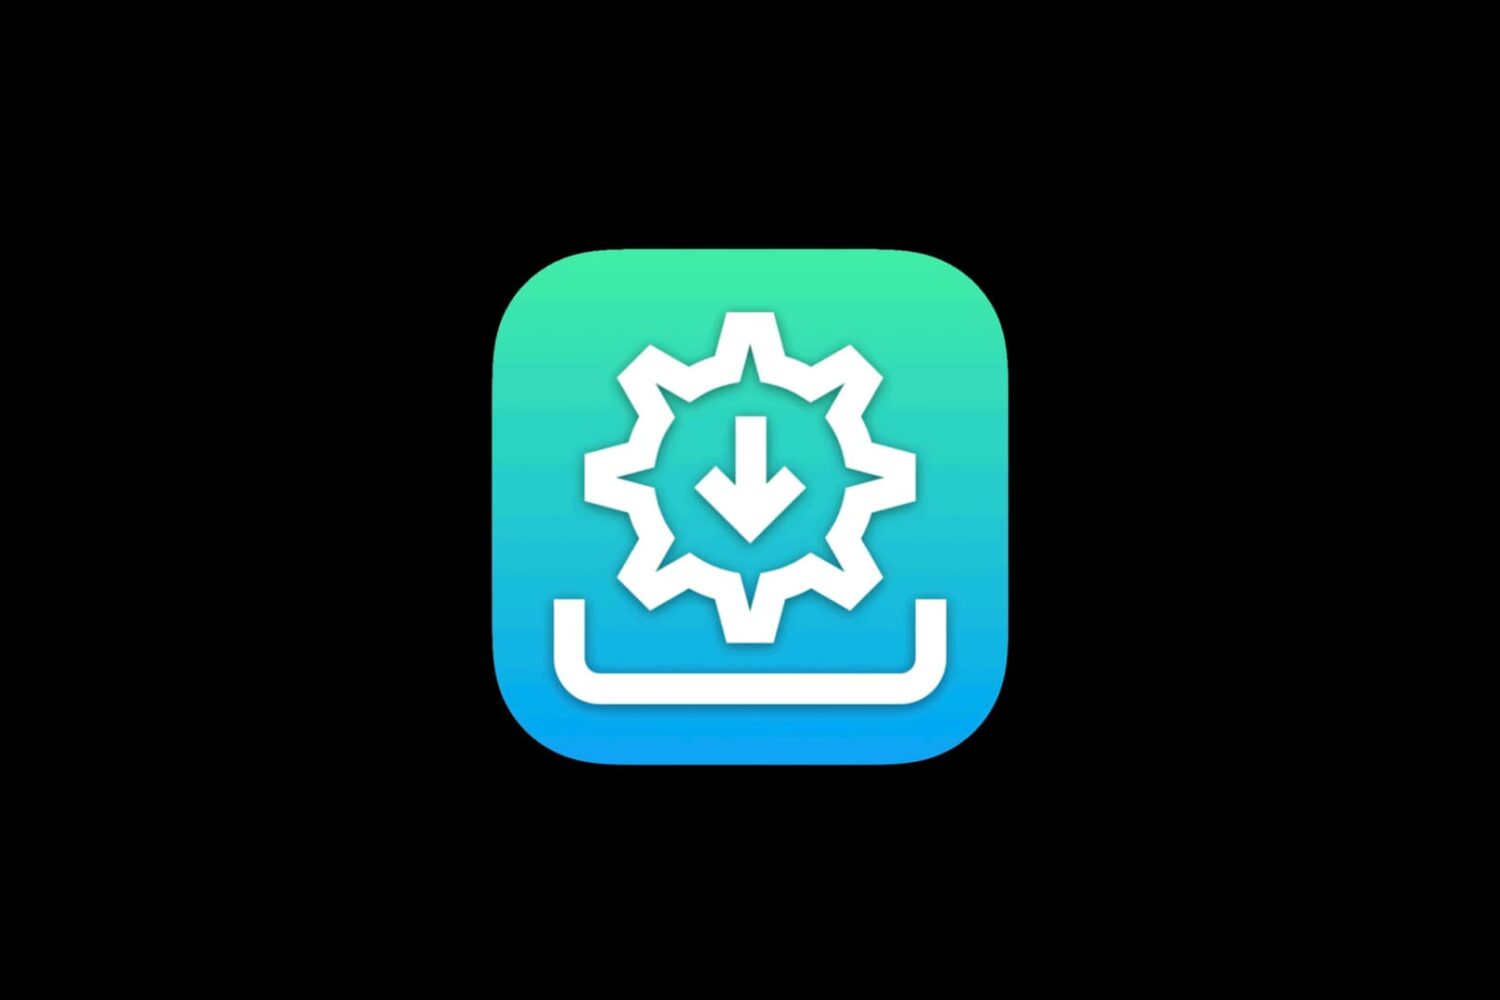 Sideloadly app icon against a black background.